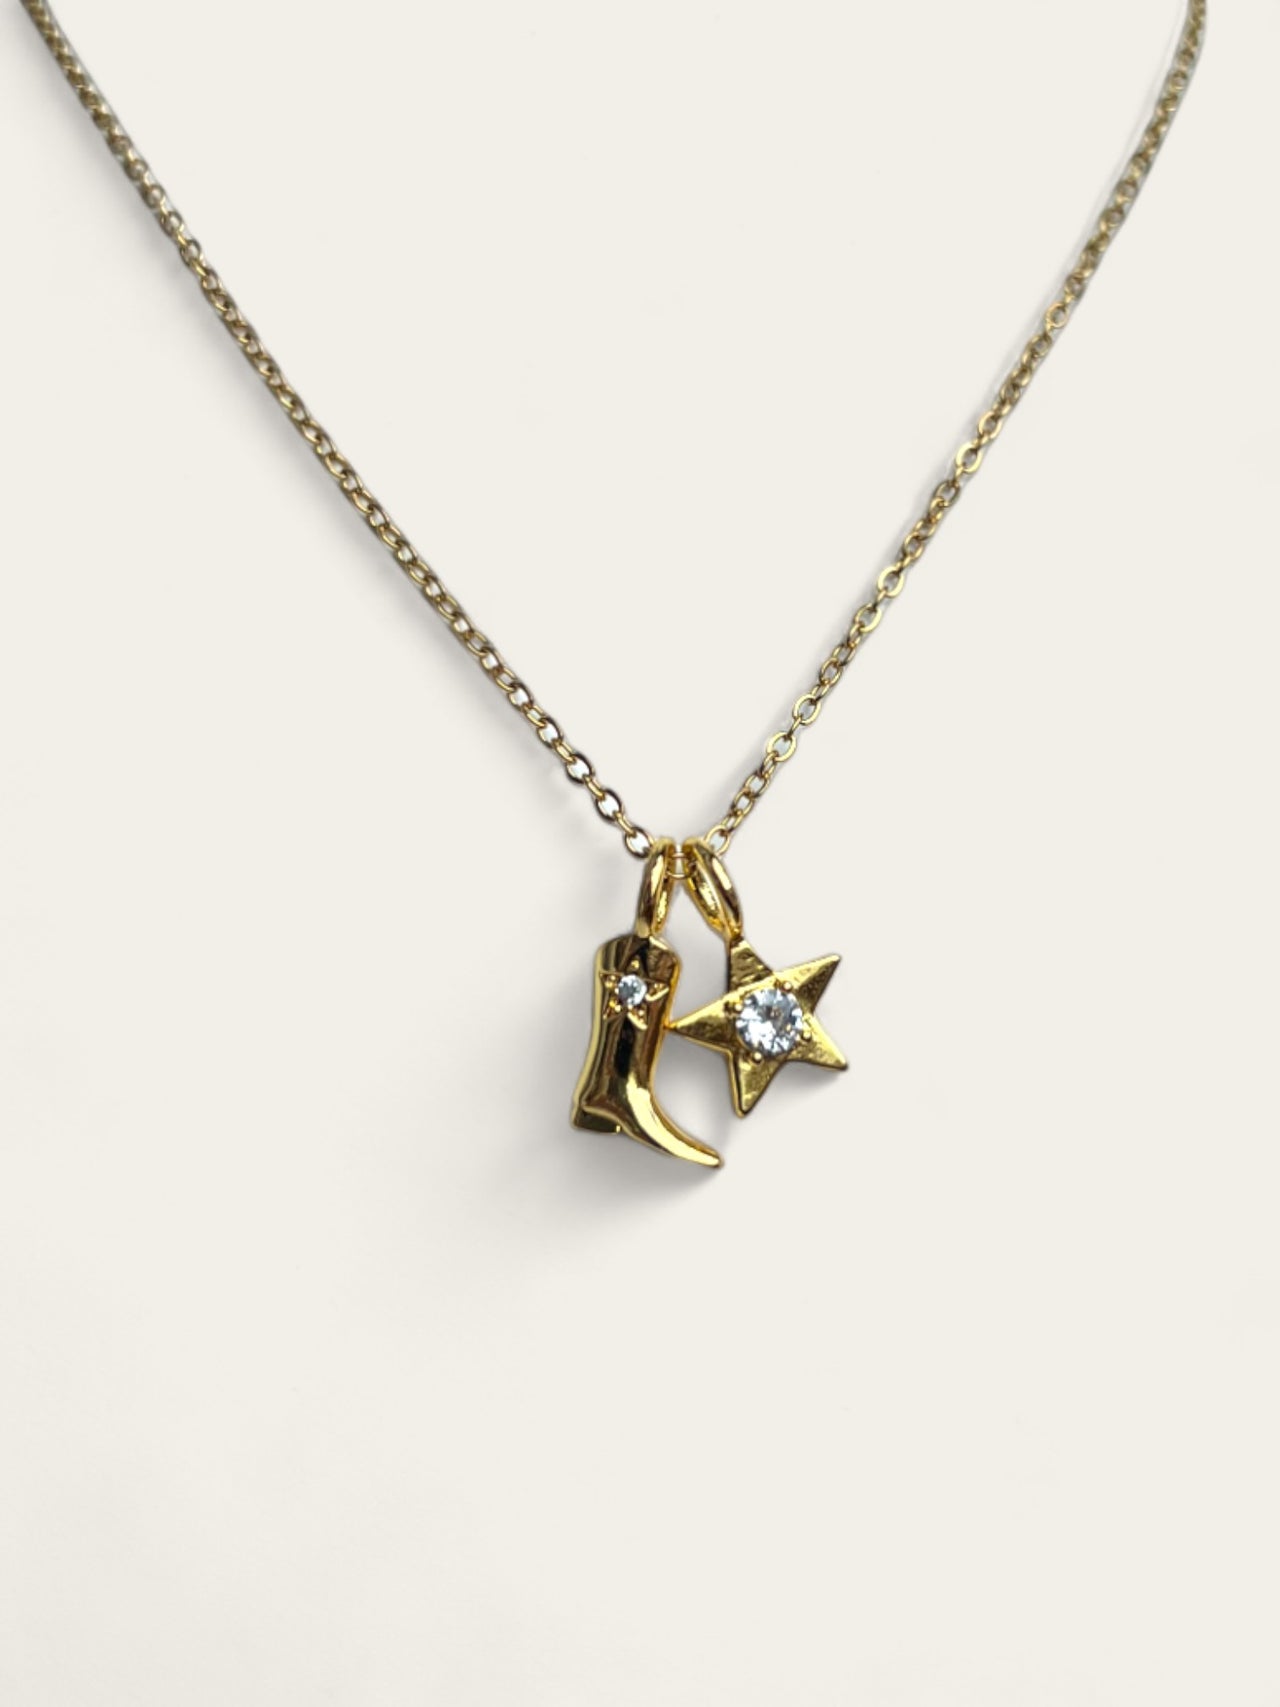 Cowboy Star Necklace - Gold